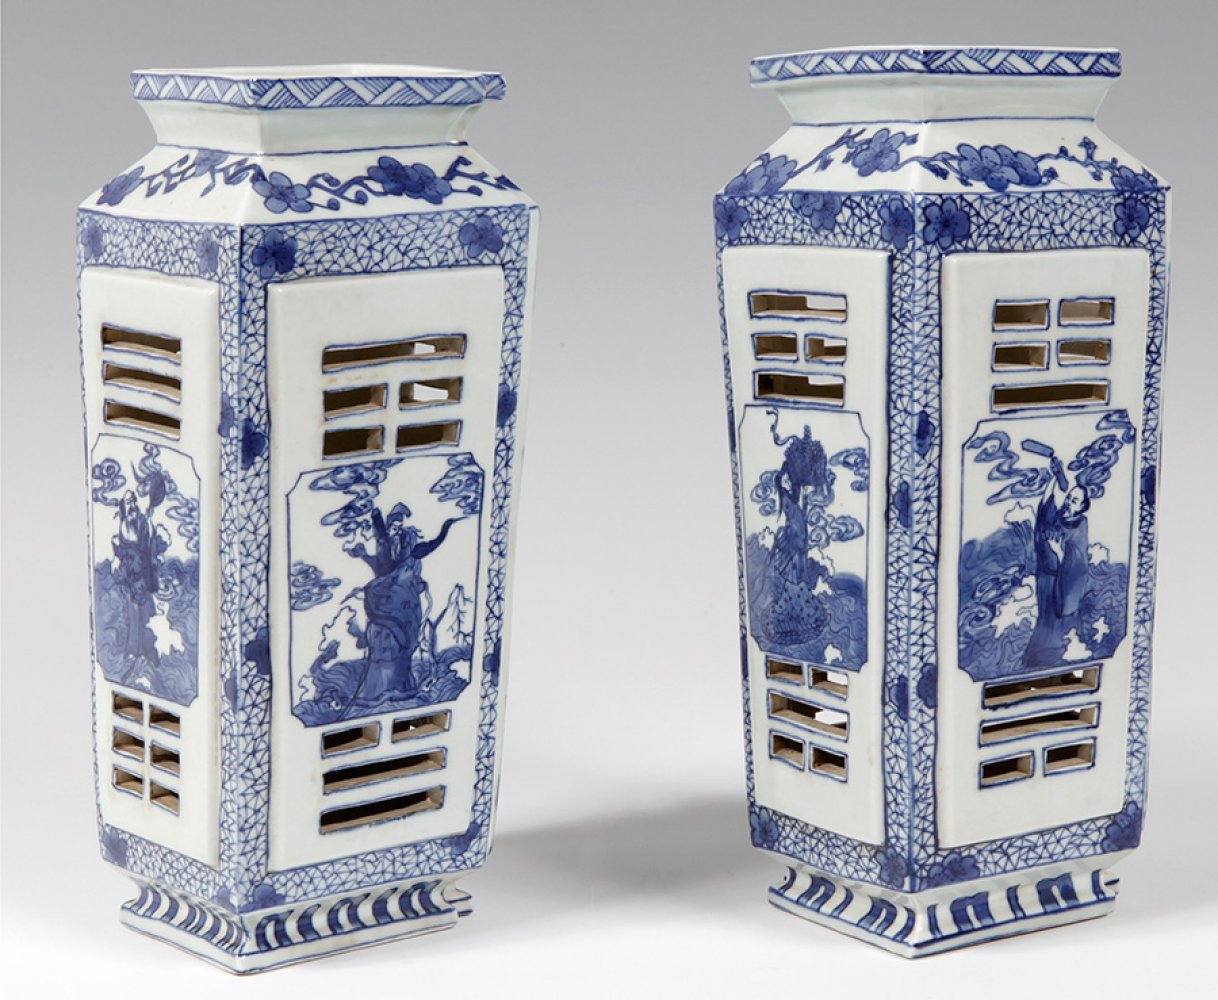 Pair of vases; Fujian, China, Qing dynasty, late 19th, early 20th century.Enamelled porcelain.With - Image 2 of 4